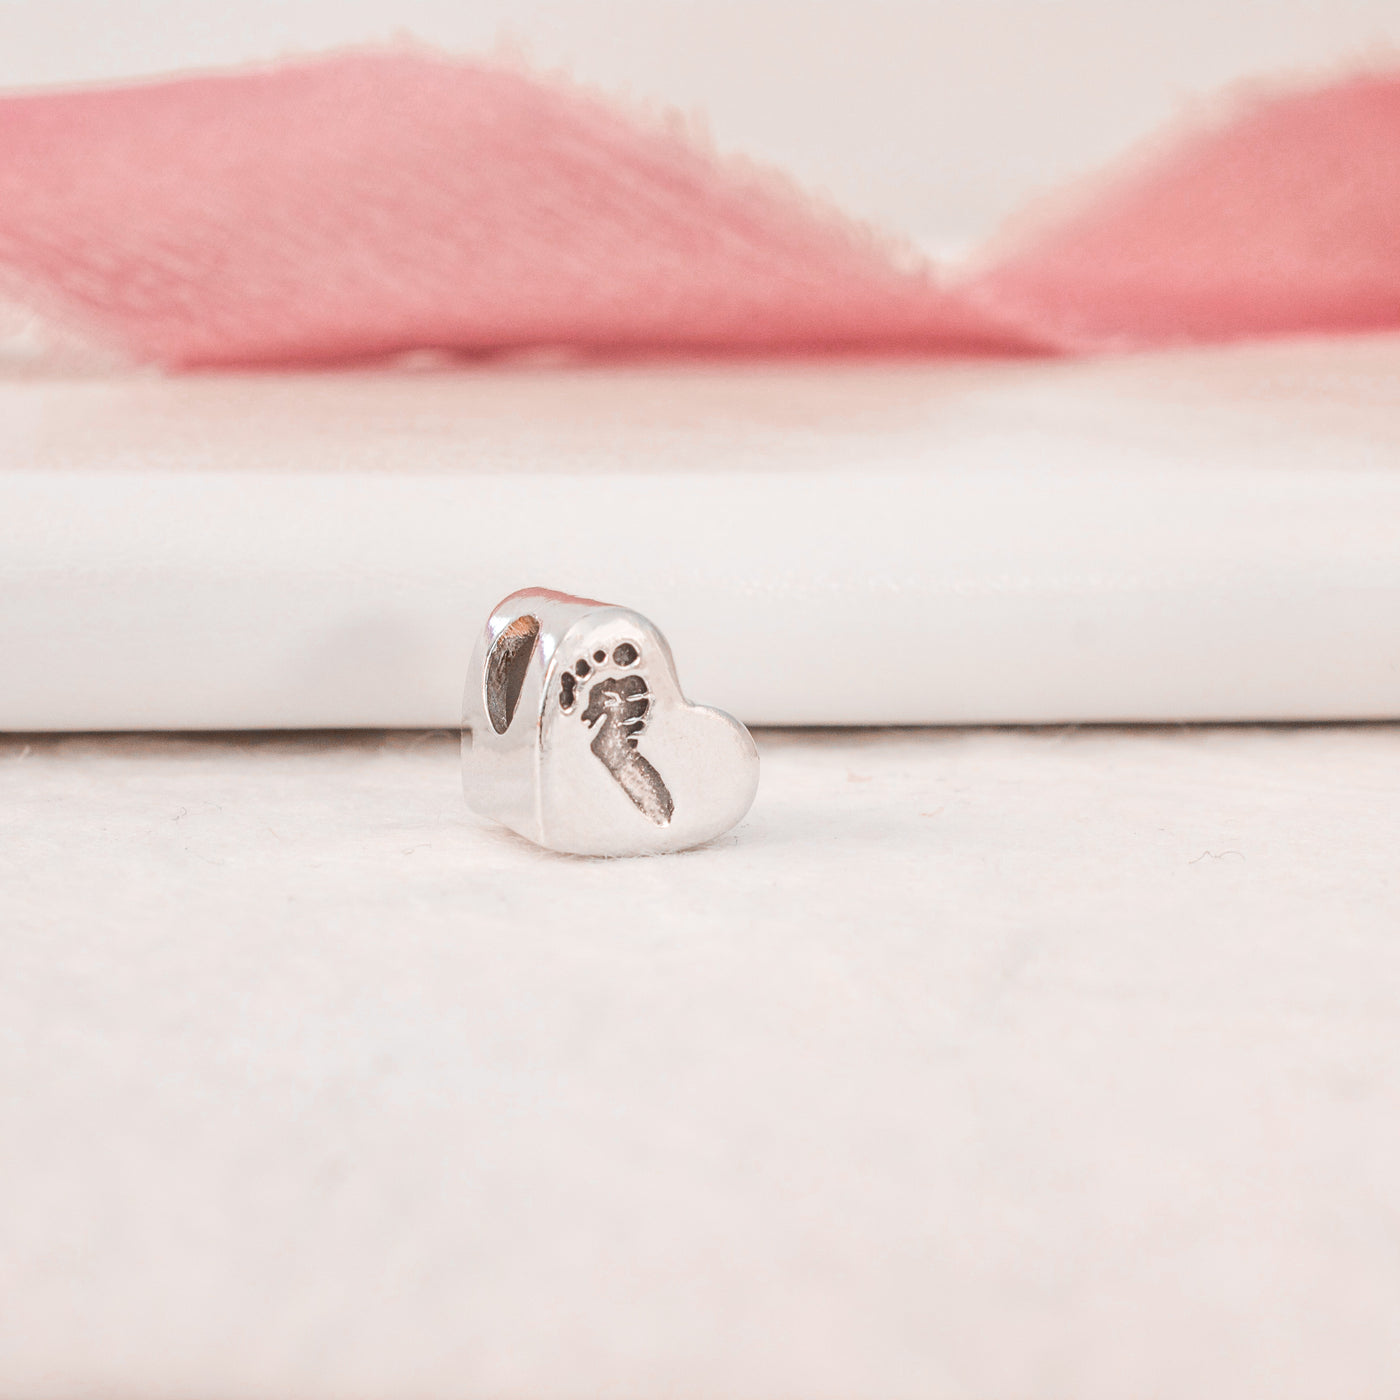 PERSONALIZED HAND OR FOOTPRINT HEART PANDORA BEAD | forever imprint jewellery